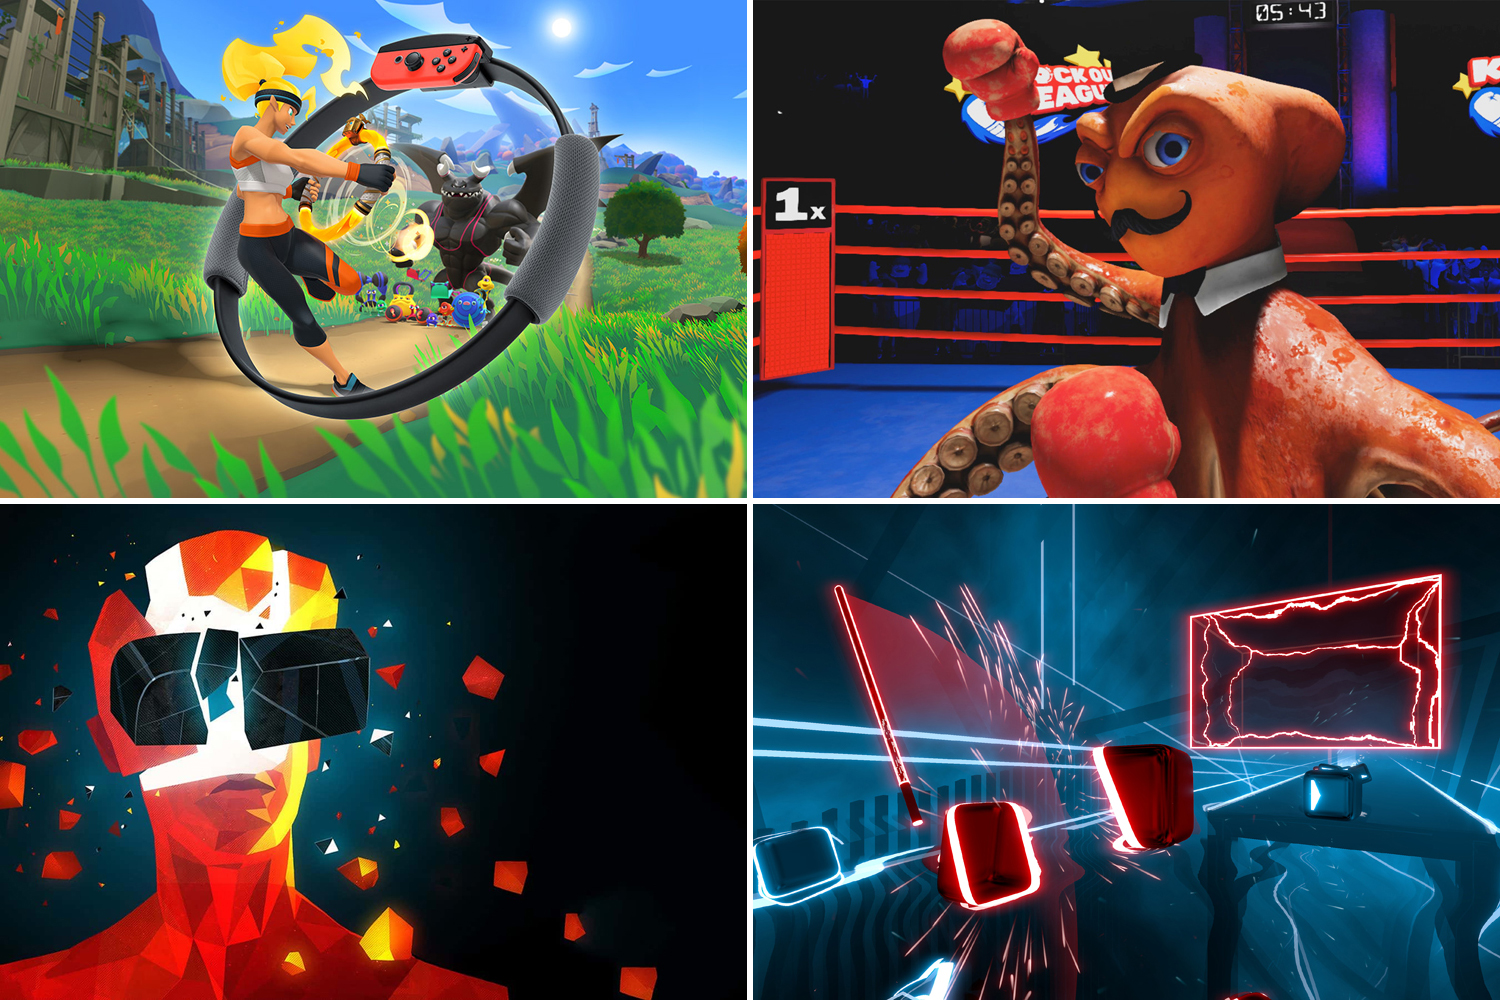 The best games that will make you work up a sweat | Time In 2020